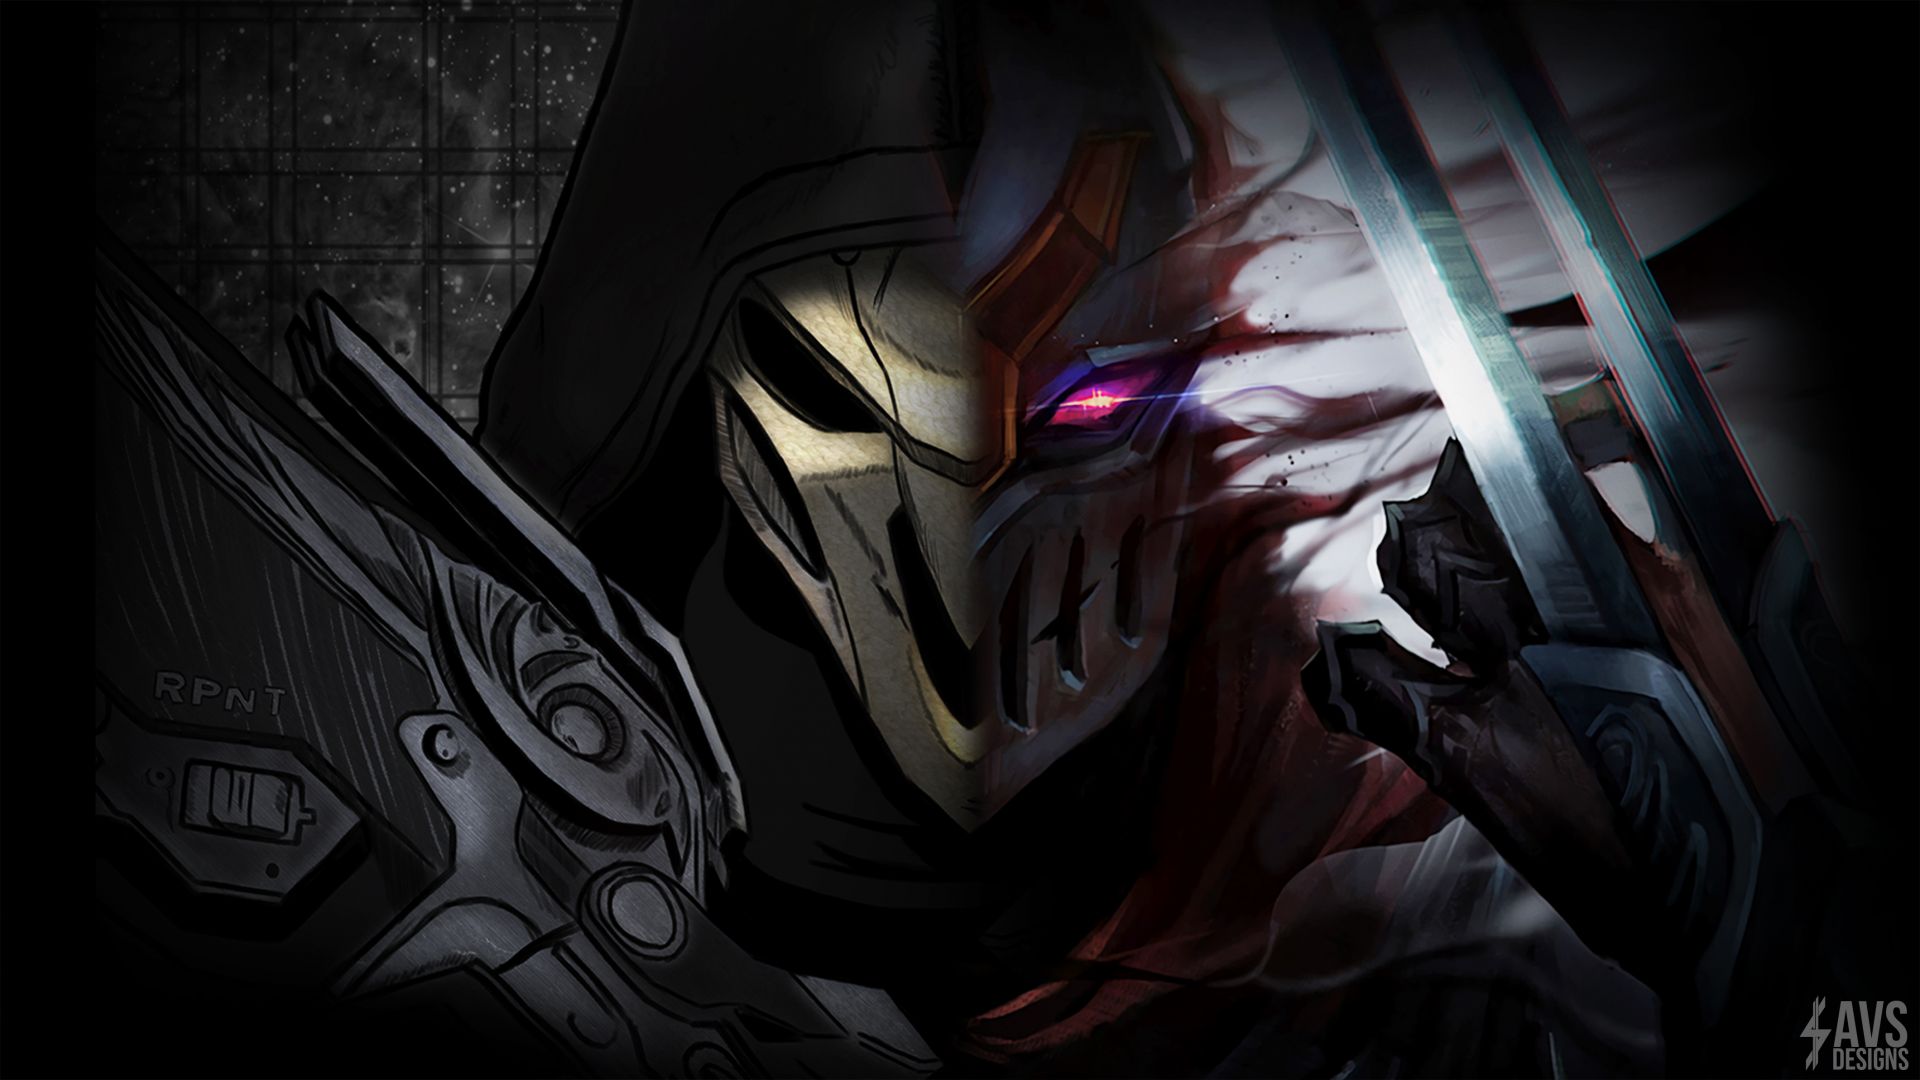 Desktop Wallpaper Zed Reaper Video Game League Of Legends Overwatch Video Game Hd Image Picture Background Ynqha9